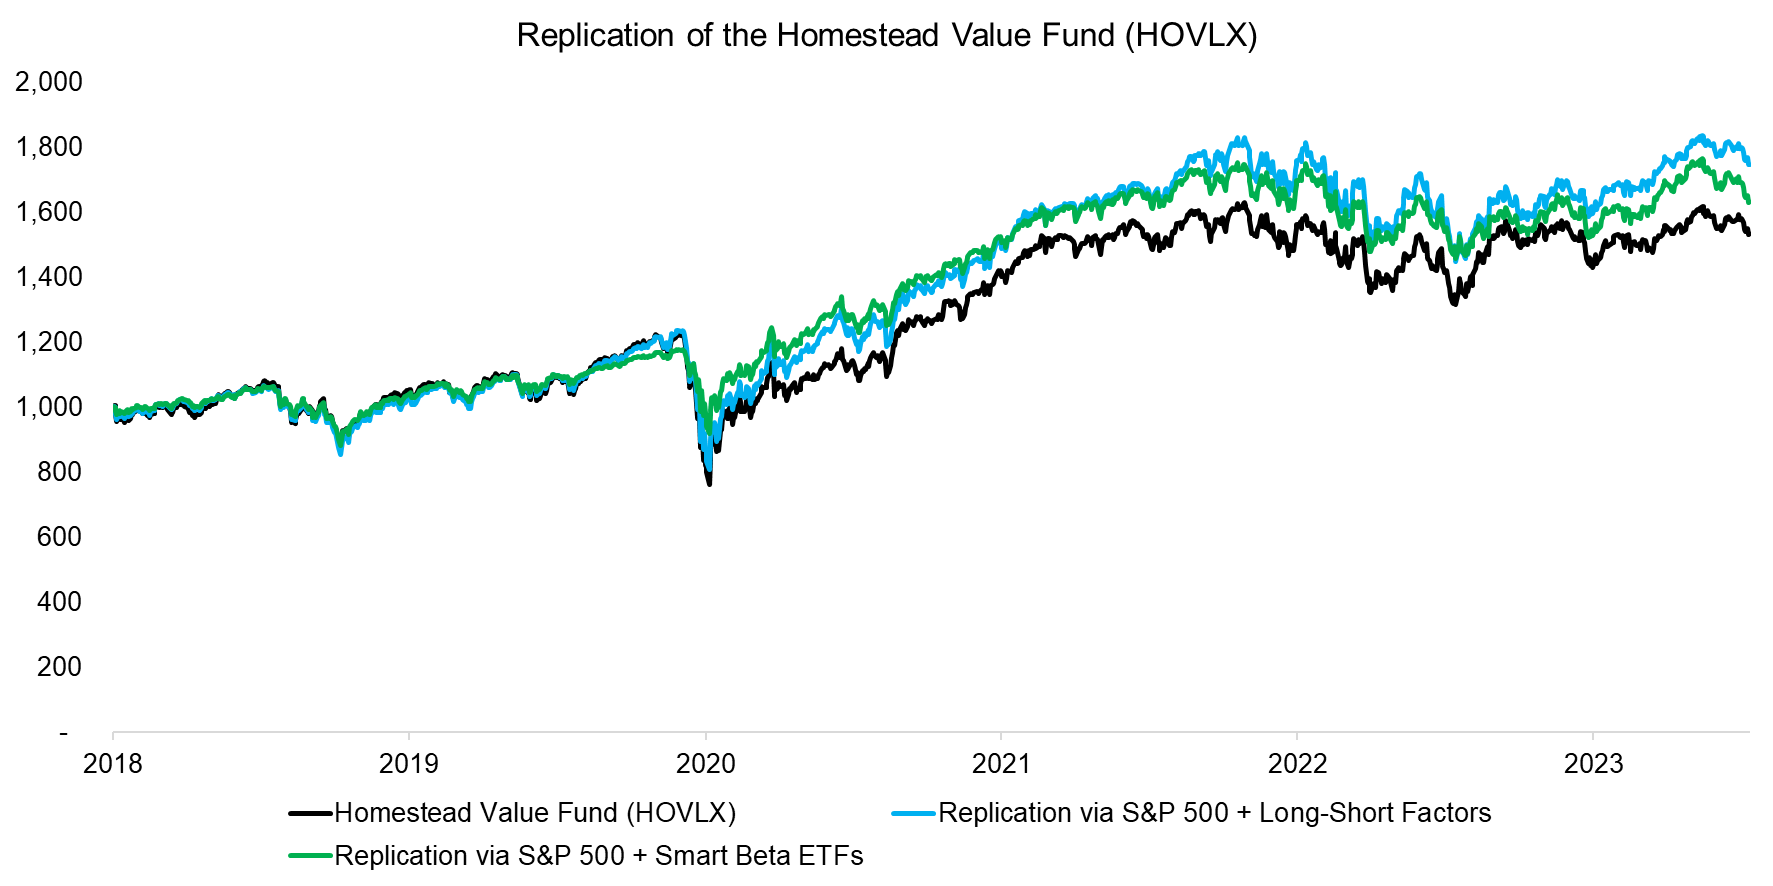 Replication of the Homestead Value Fund (HOVLX)s